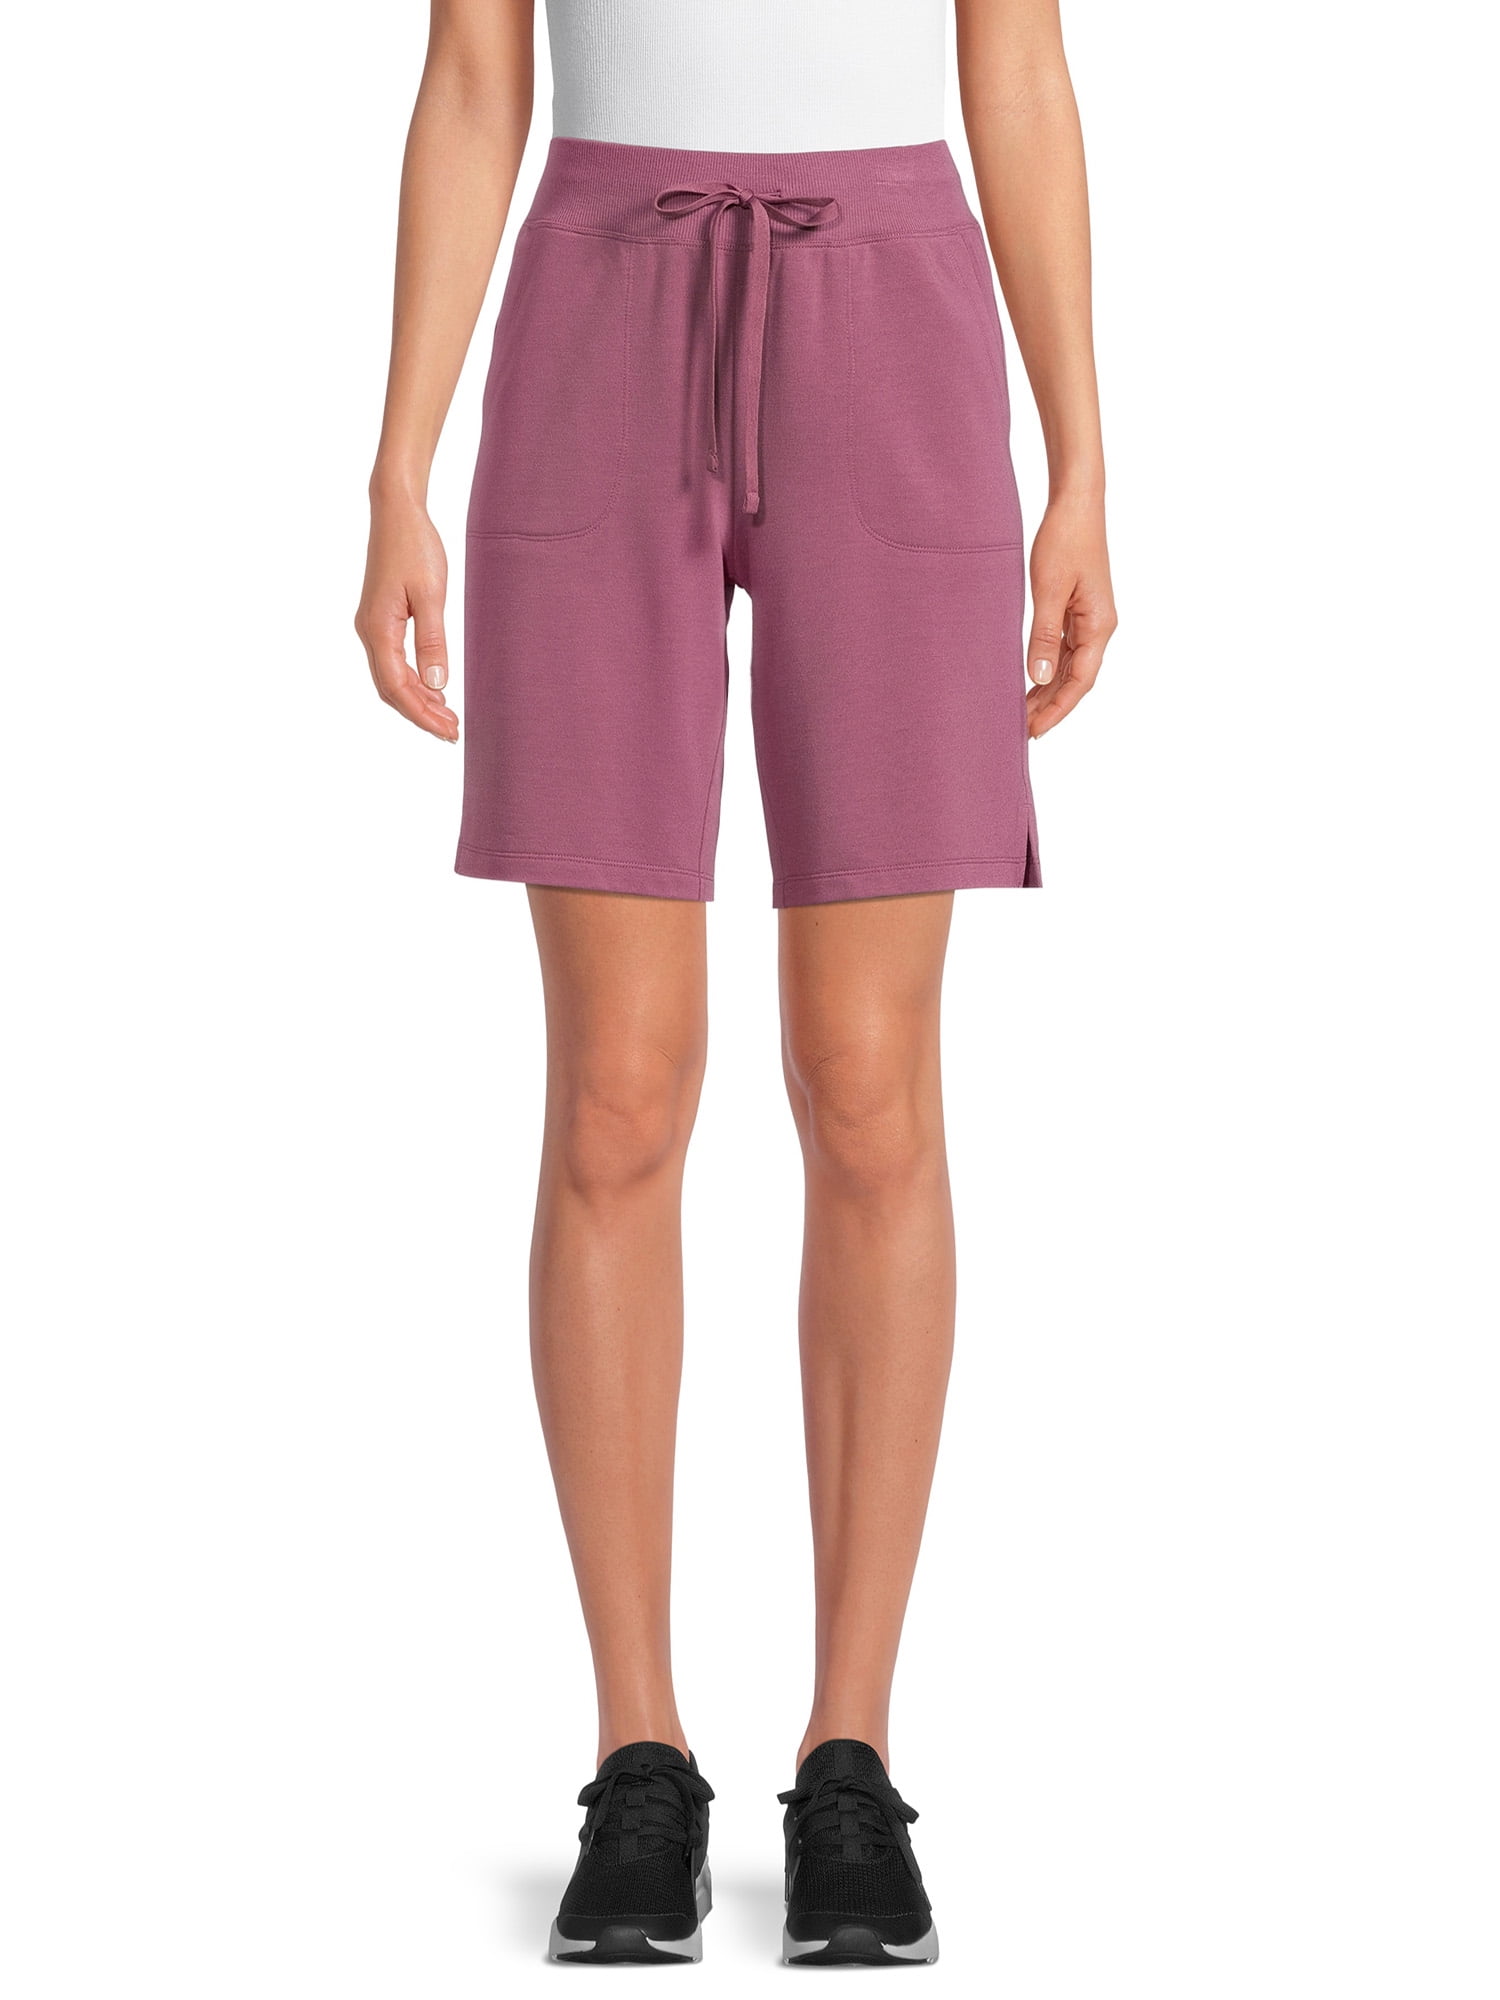 Athletic Works Women's French Terry Cloth Bermuda Shorts